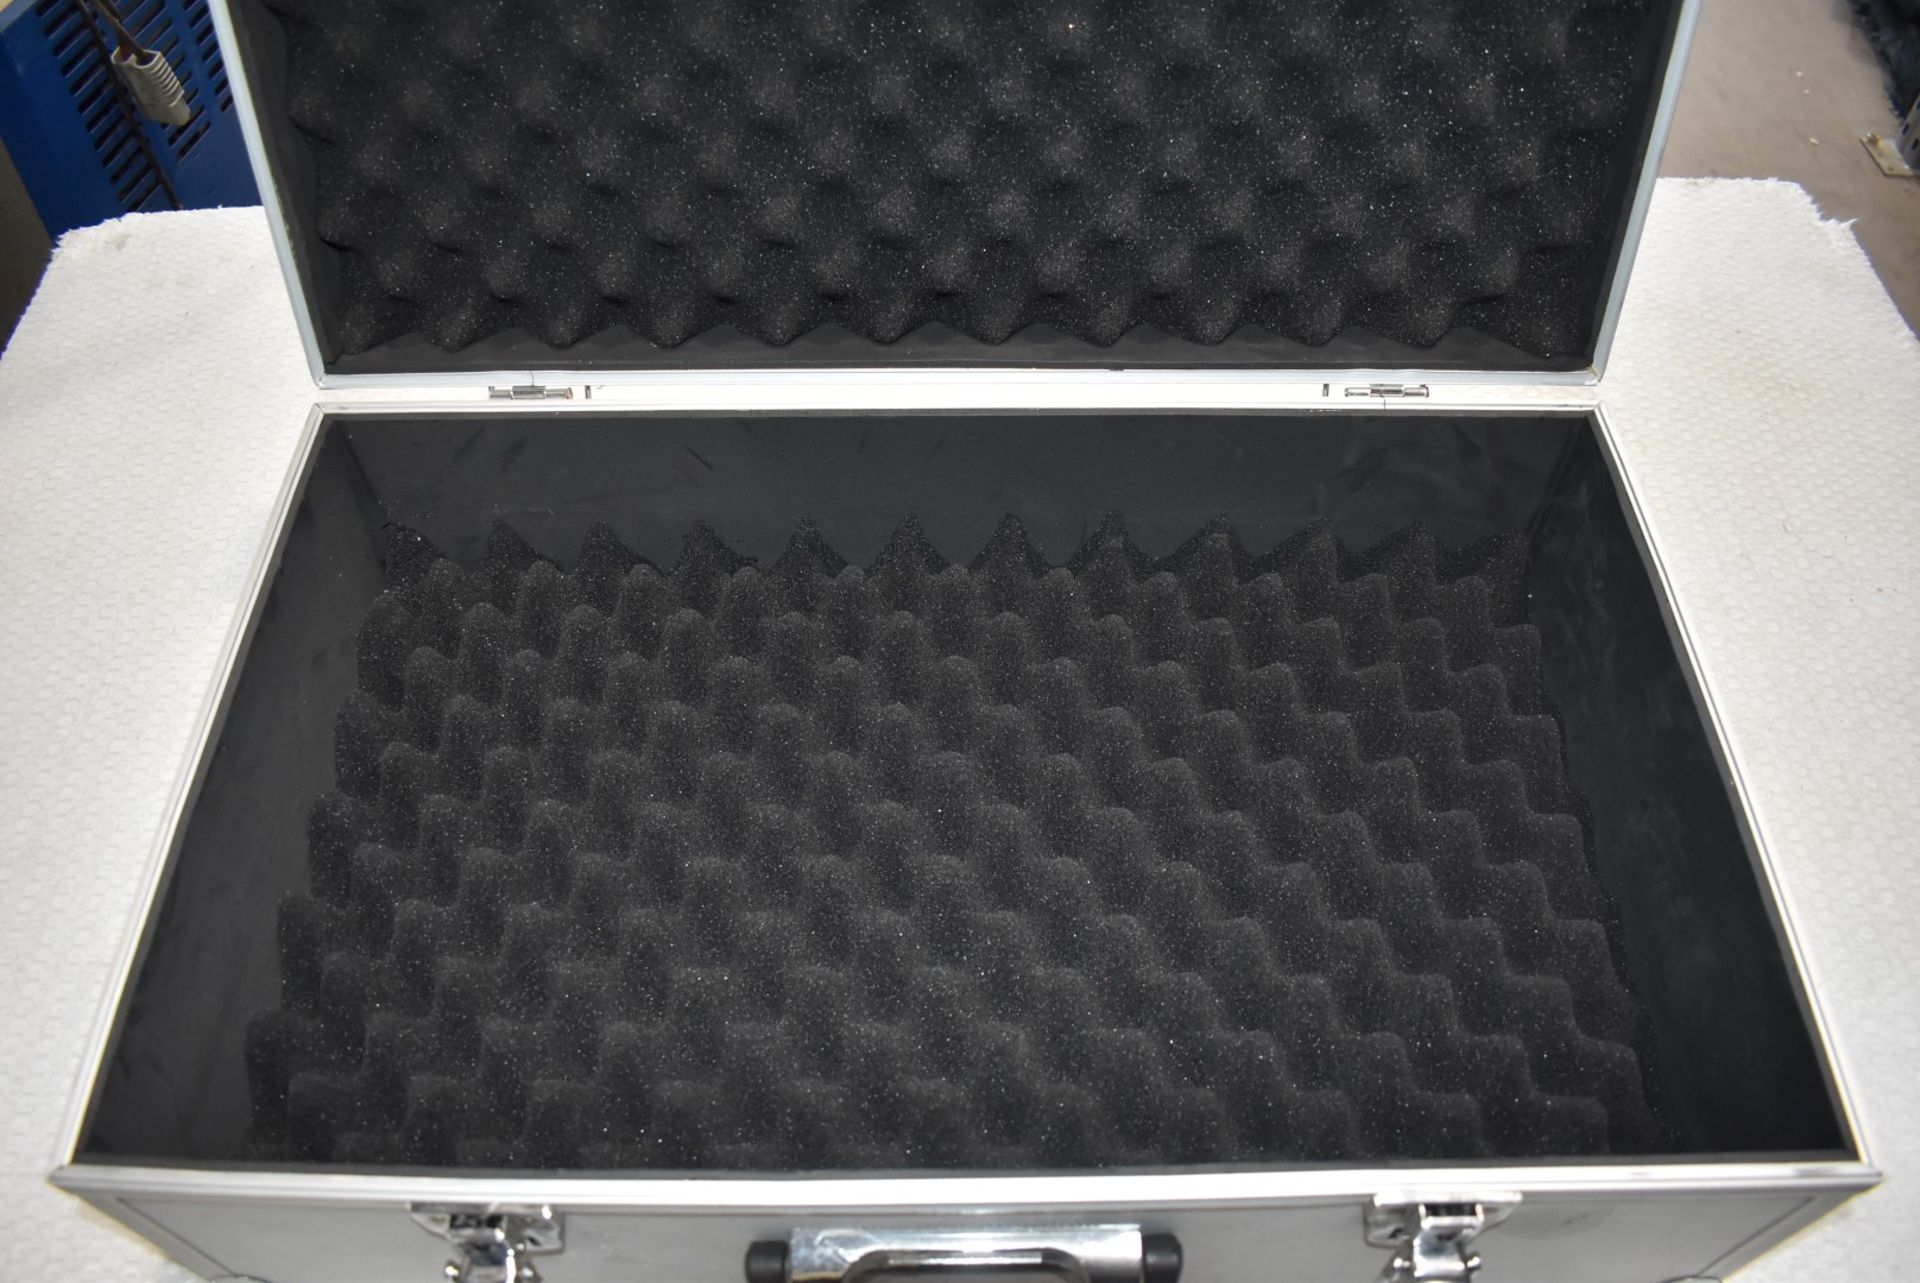 1 x Foam Padded Heavy Duty Transit Case - With Lock and Key - Size: 58 x 35 x 20 cms - Image 4 of 5